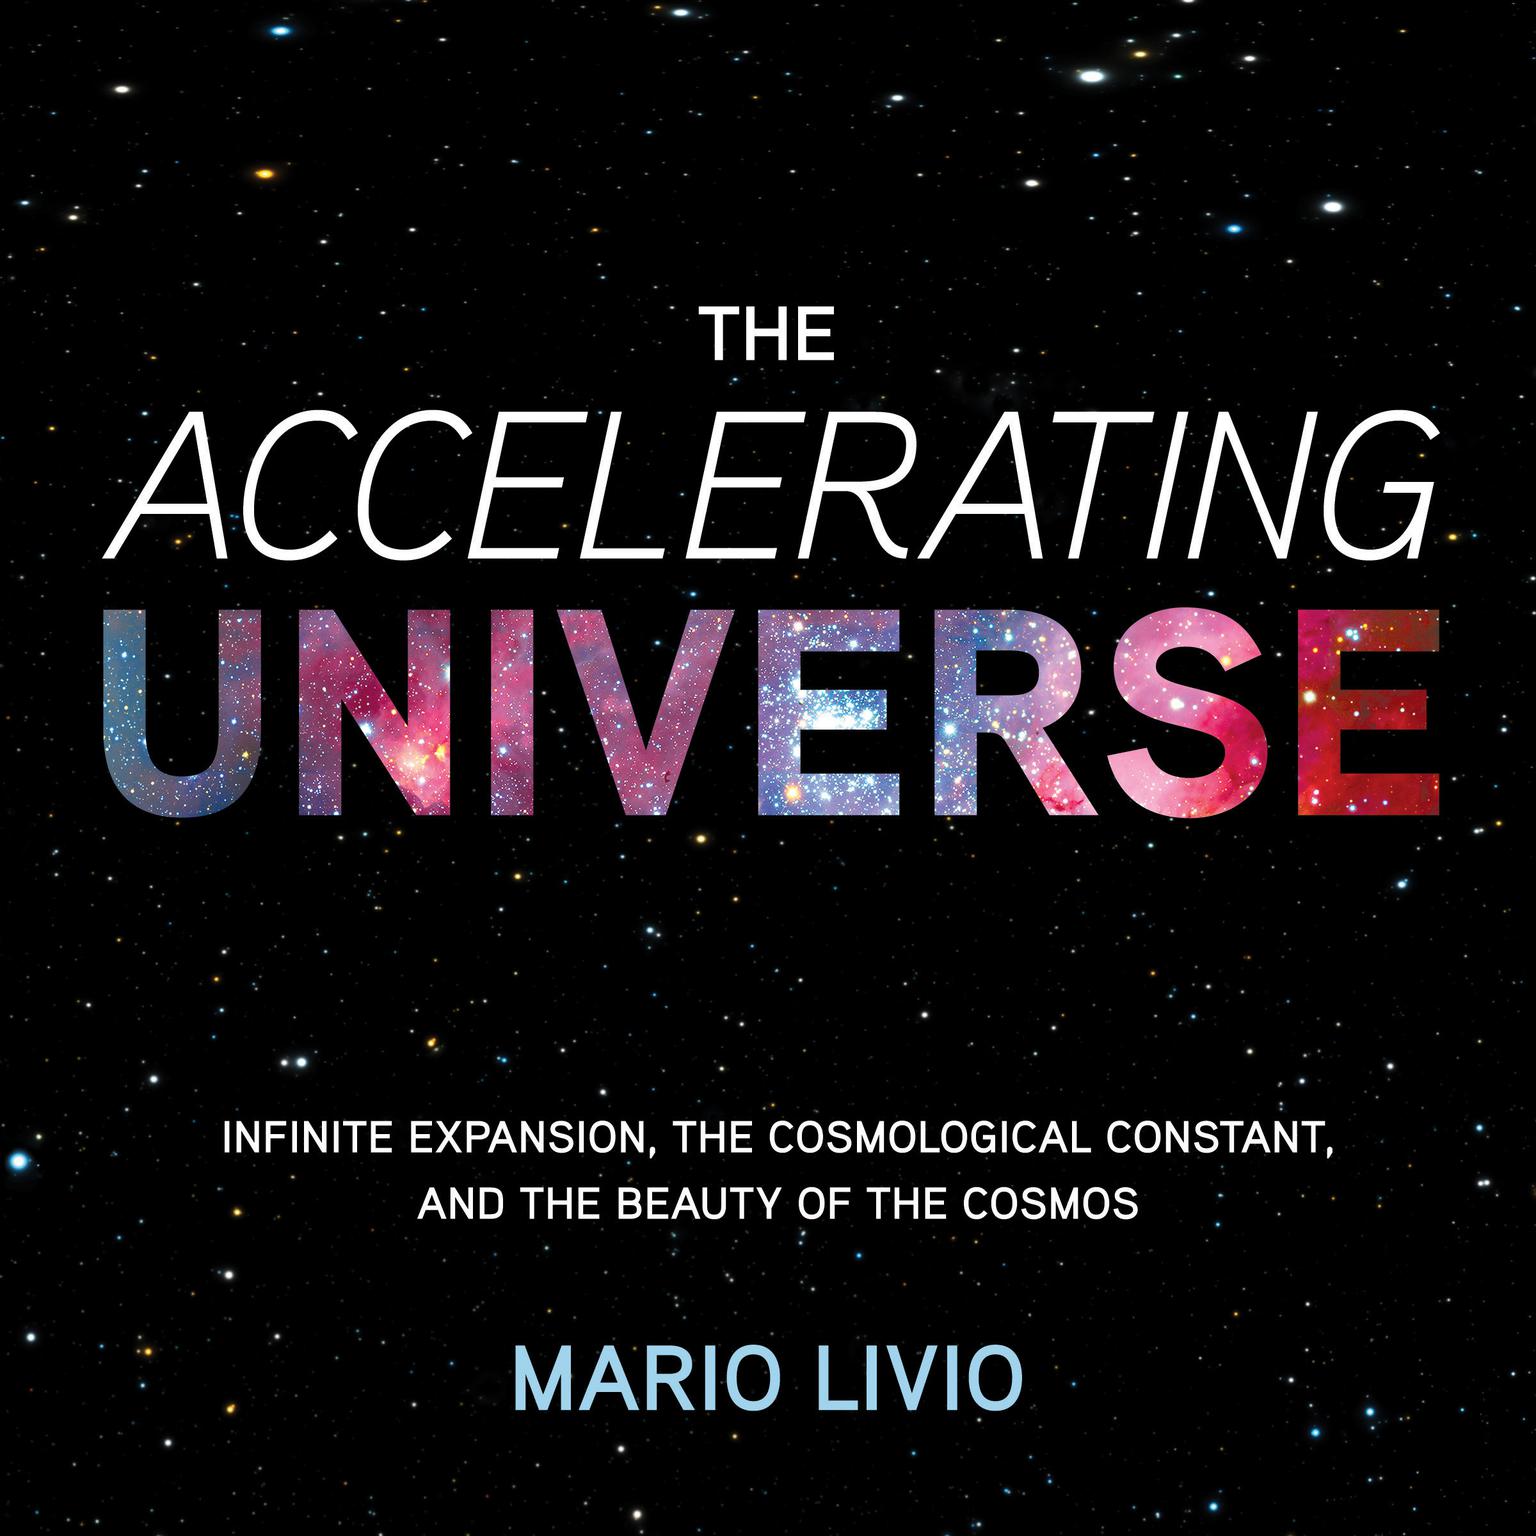 The Accelerating Universe: Infinite Expansion, the Cosmological Constant, and the Beauty of the Cosmos Audiobook, by Mario Livio